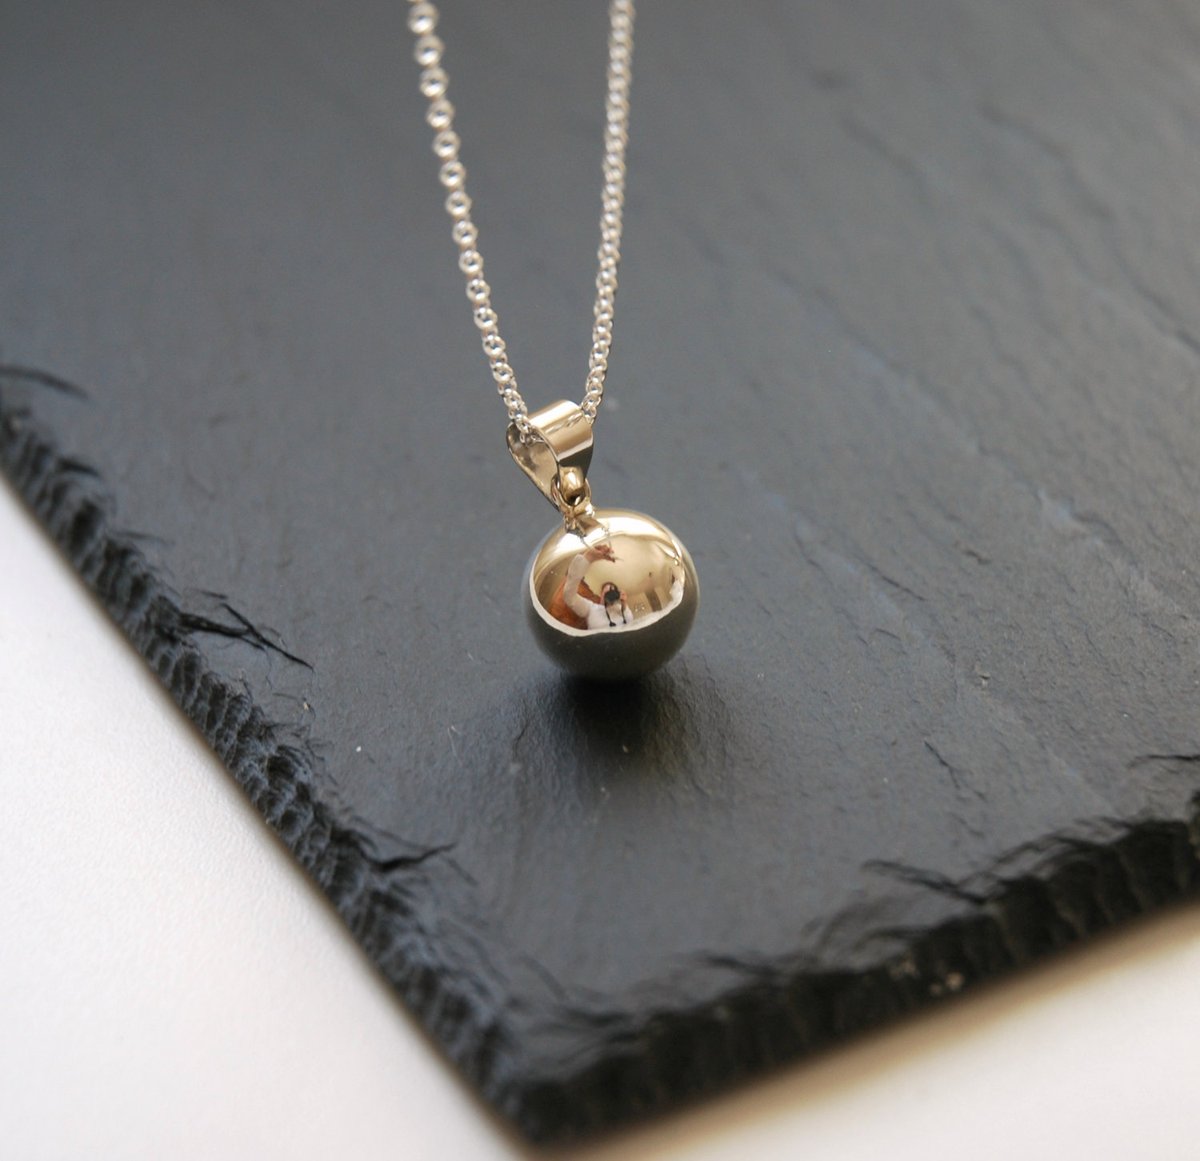 Back in stock! Sterling silver harmony ball necklace etsy.me/2TIra0n #jewelry #necklace #silver #babynecklace #harmonyball #bolaball #newmom